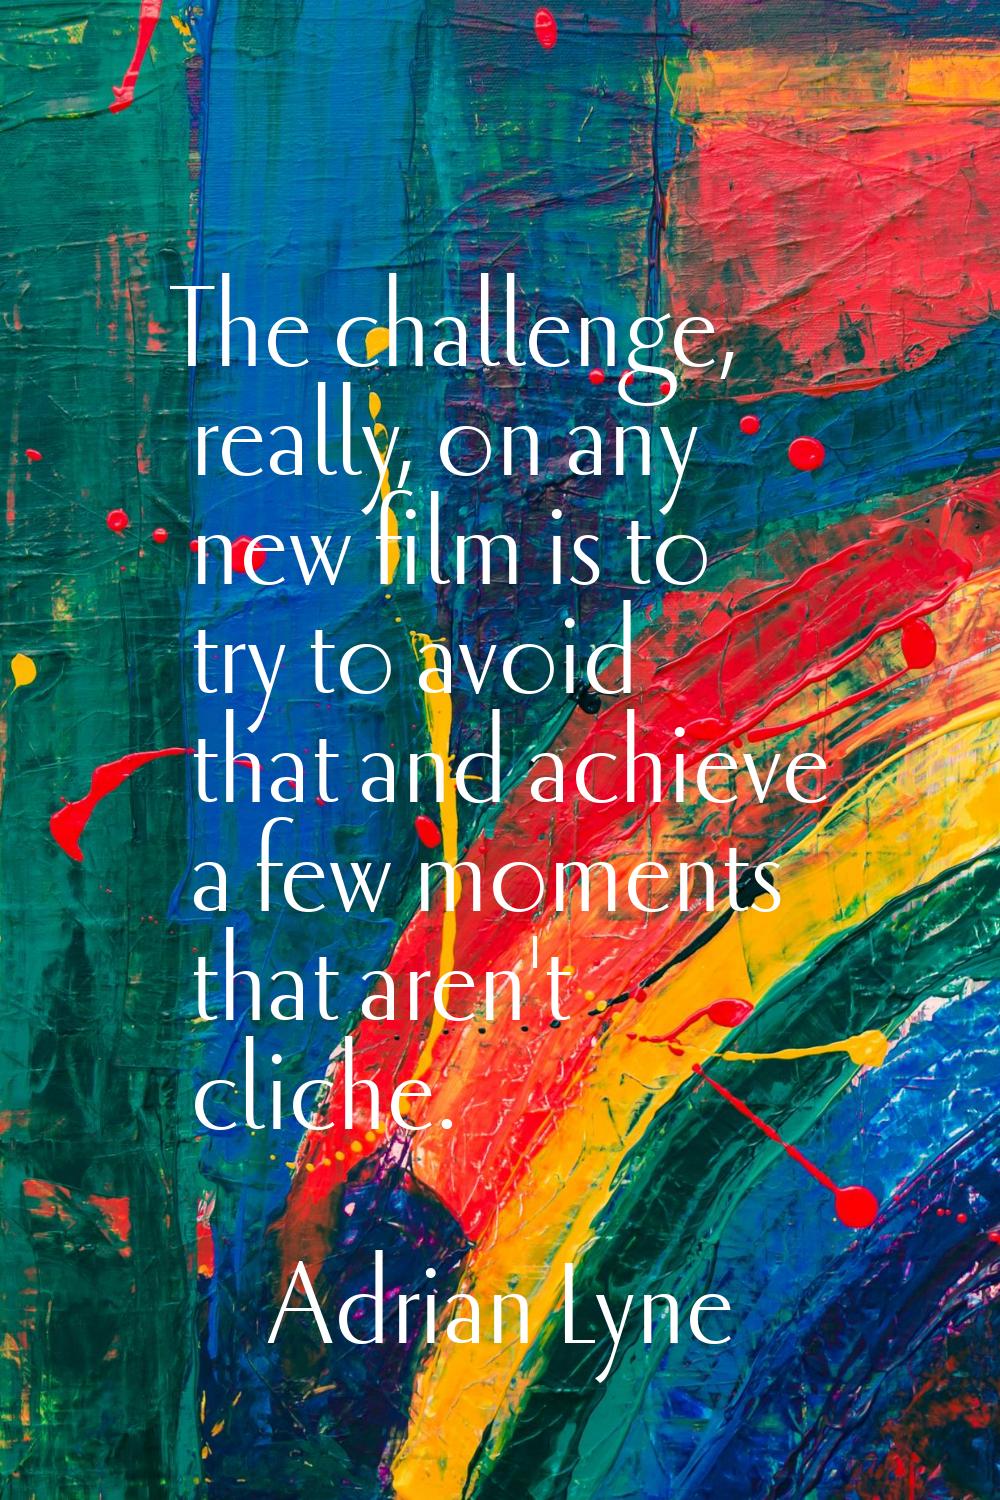 The challenge, really, on any new film is to try to avoid that and achieve a few moments that aren'